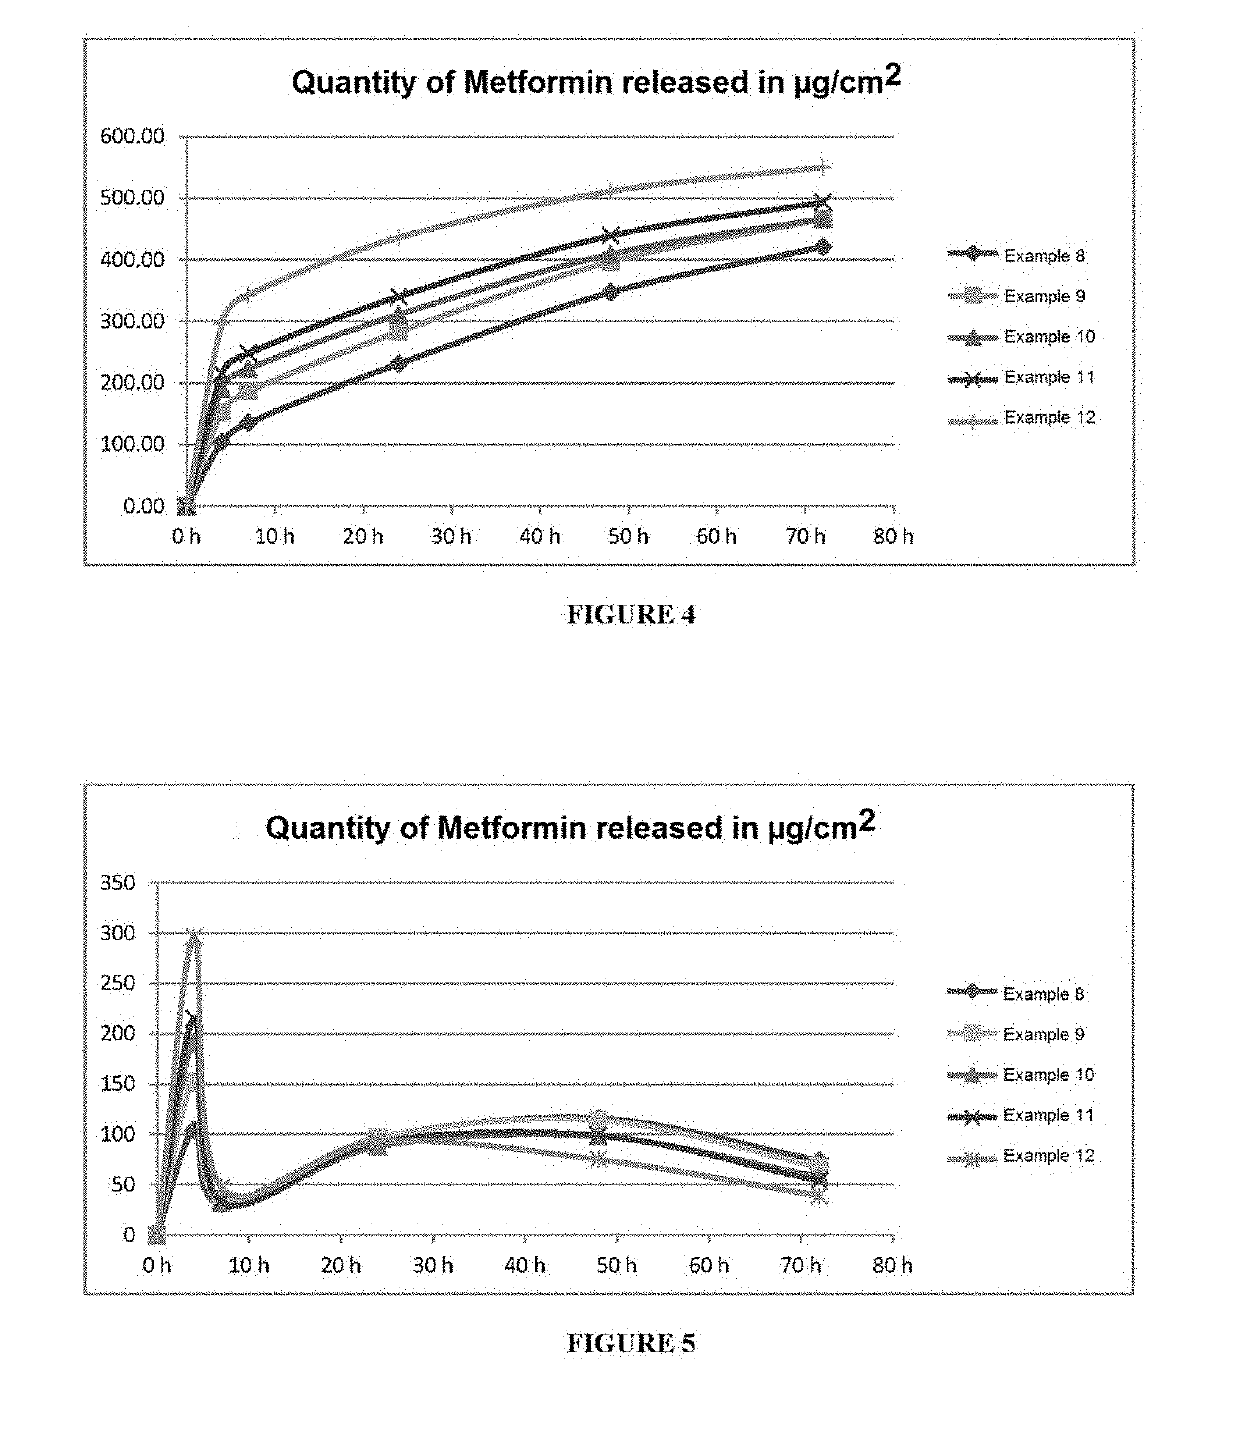 Dressing Enabling the Controlled and Prolonged Release of Metformin